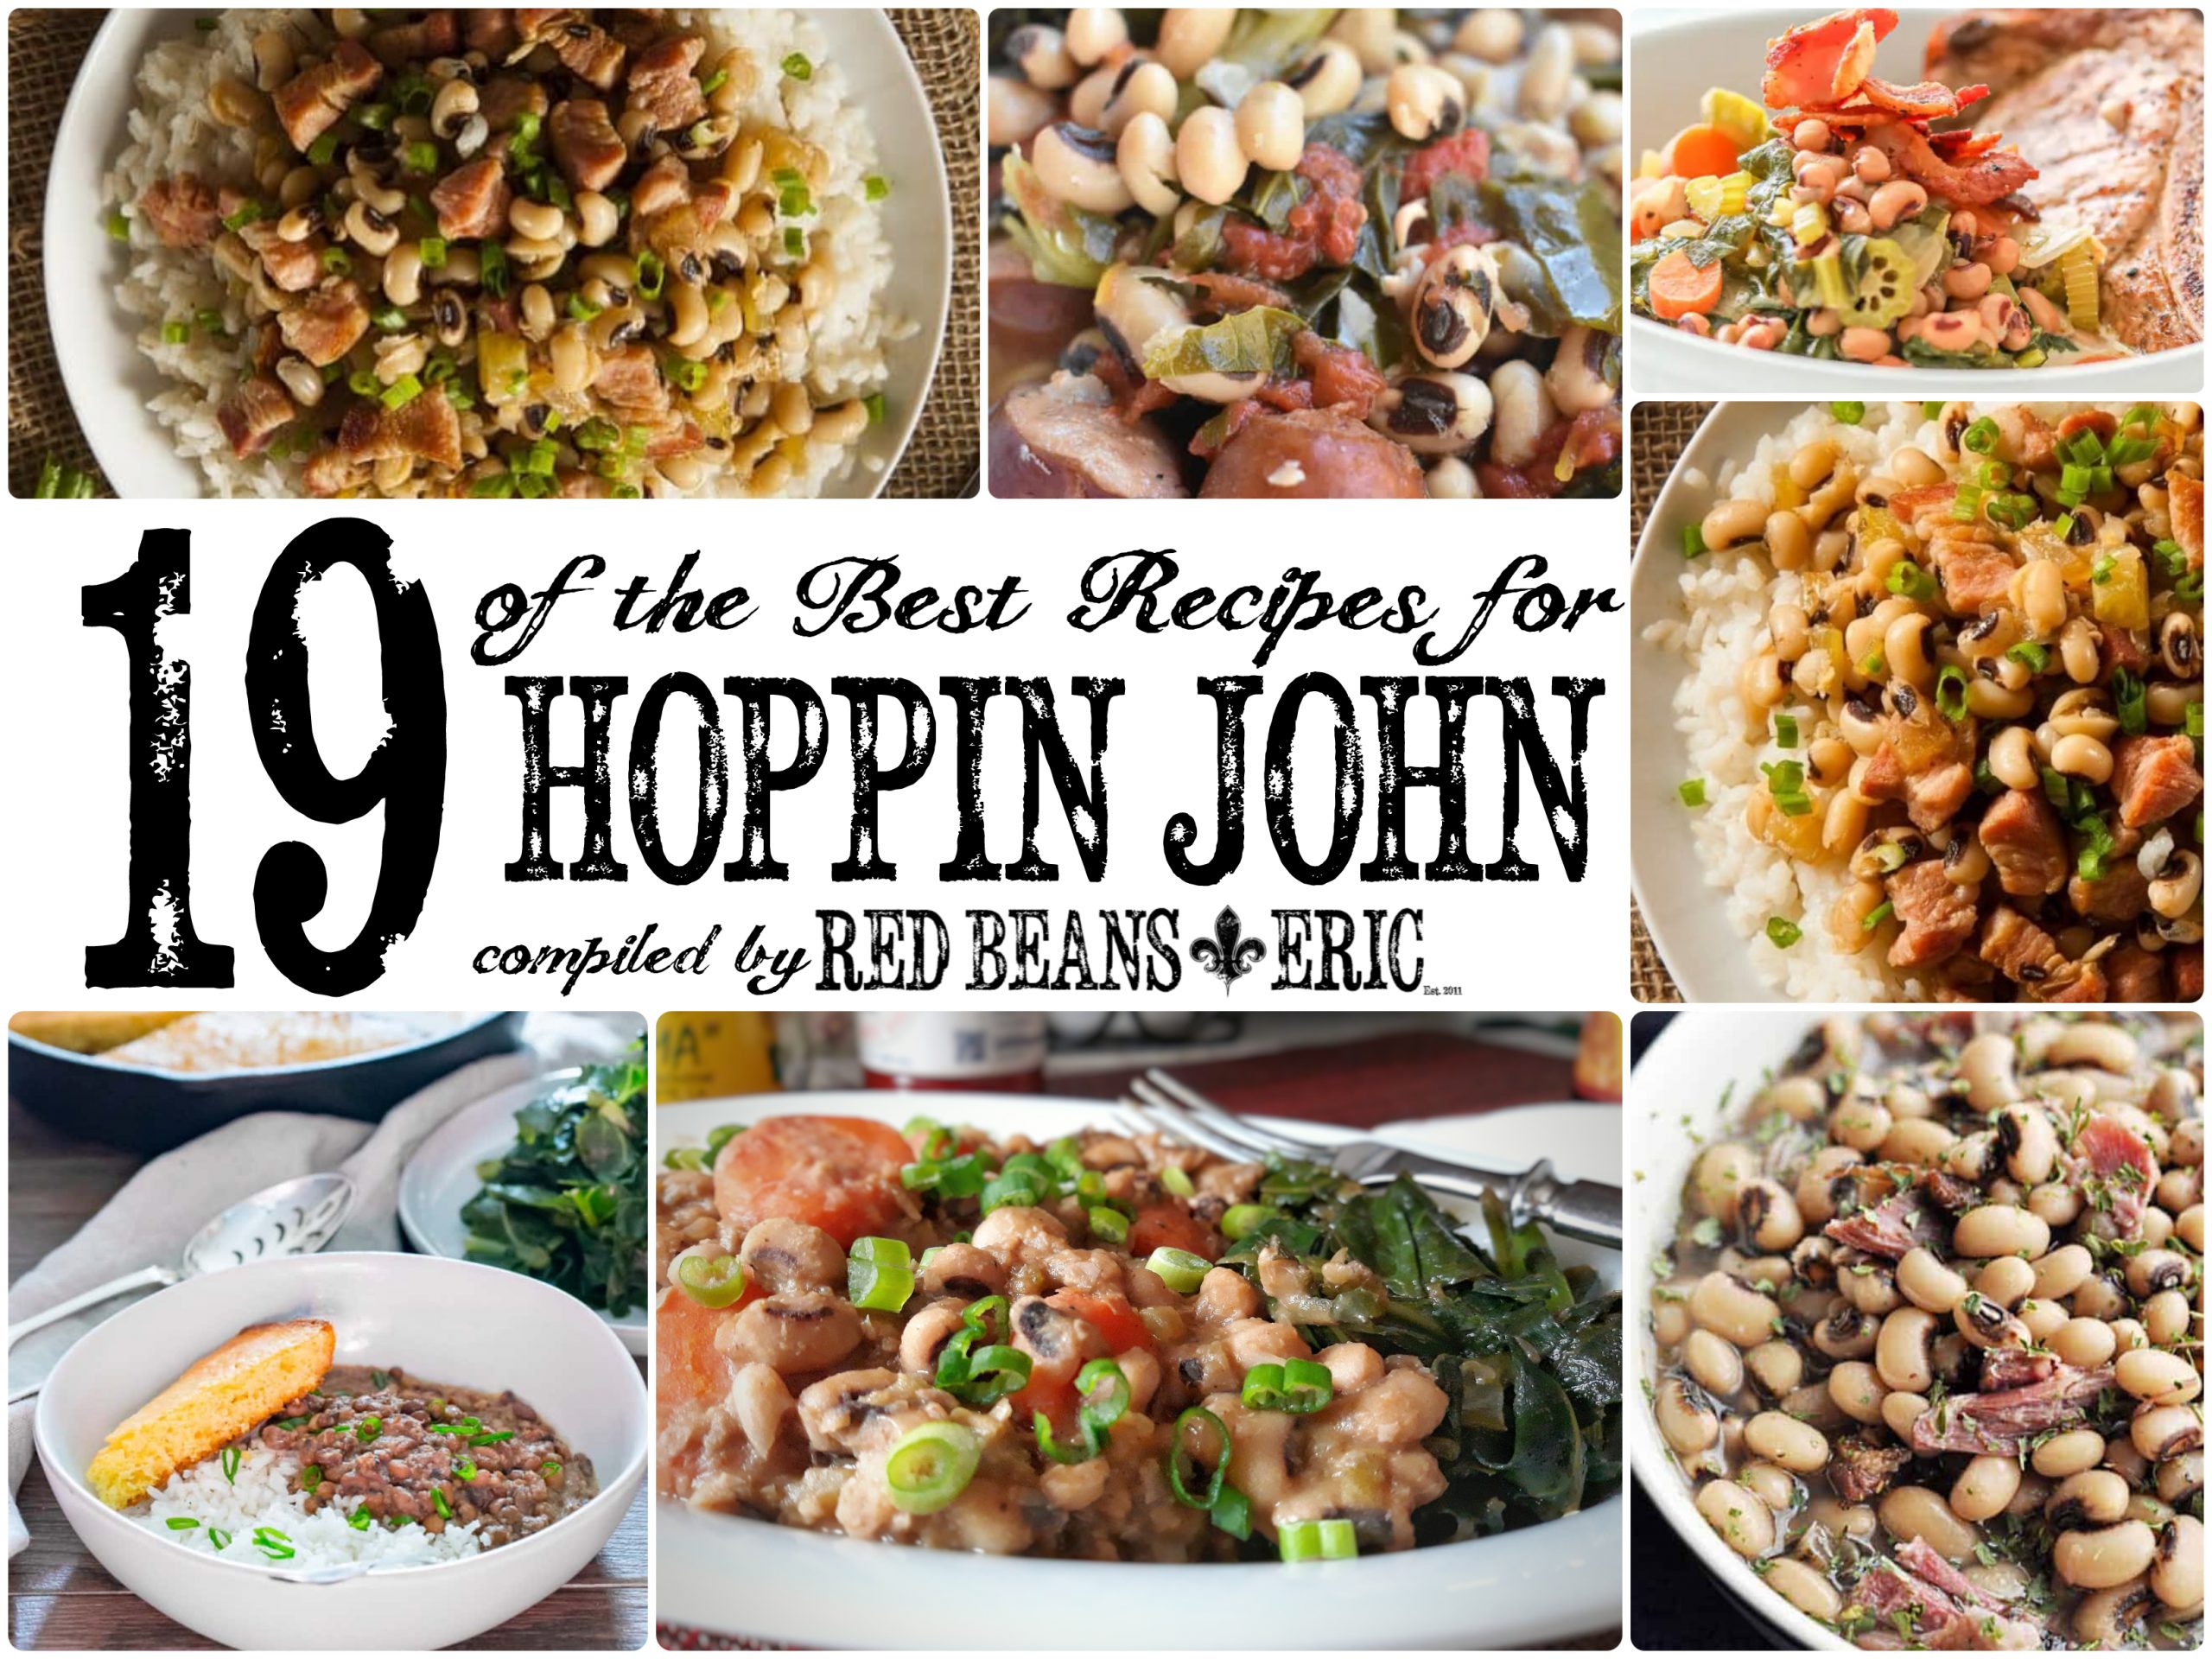 19 of the best recipes for Hoppin John compiled by Red Beans and Eric